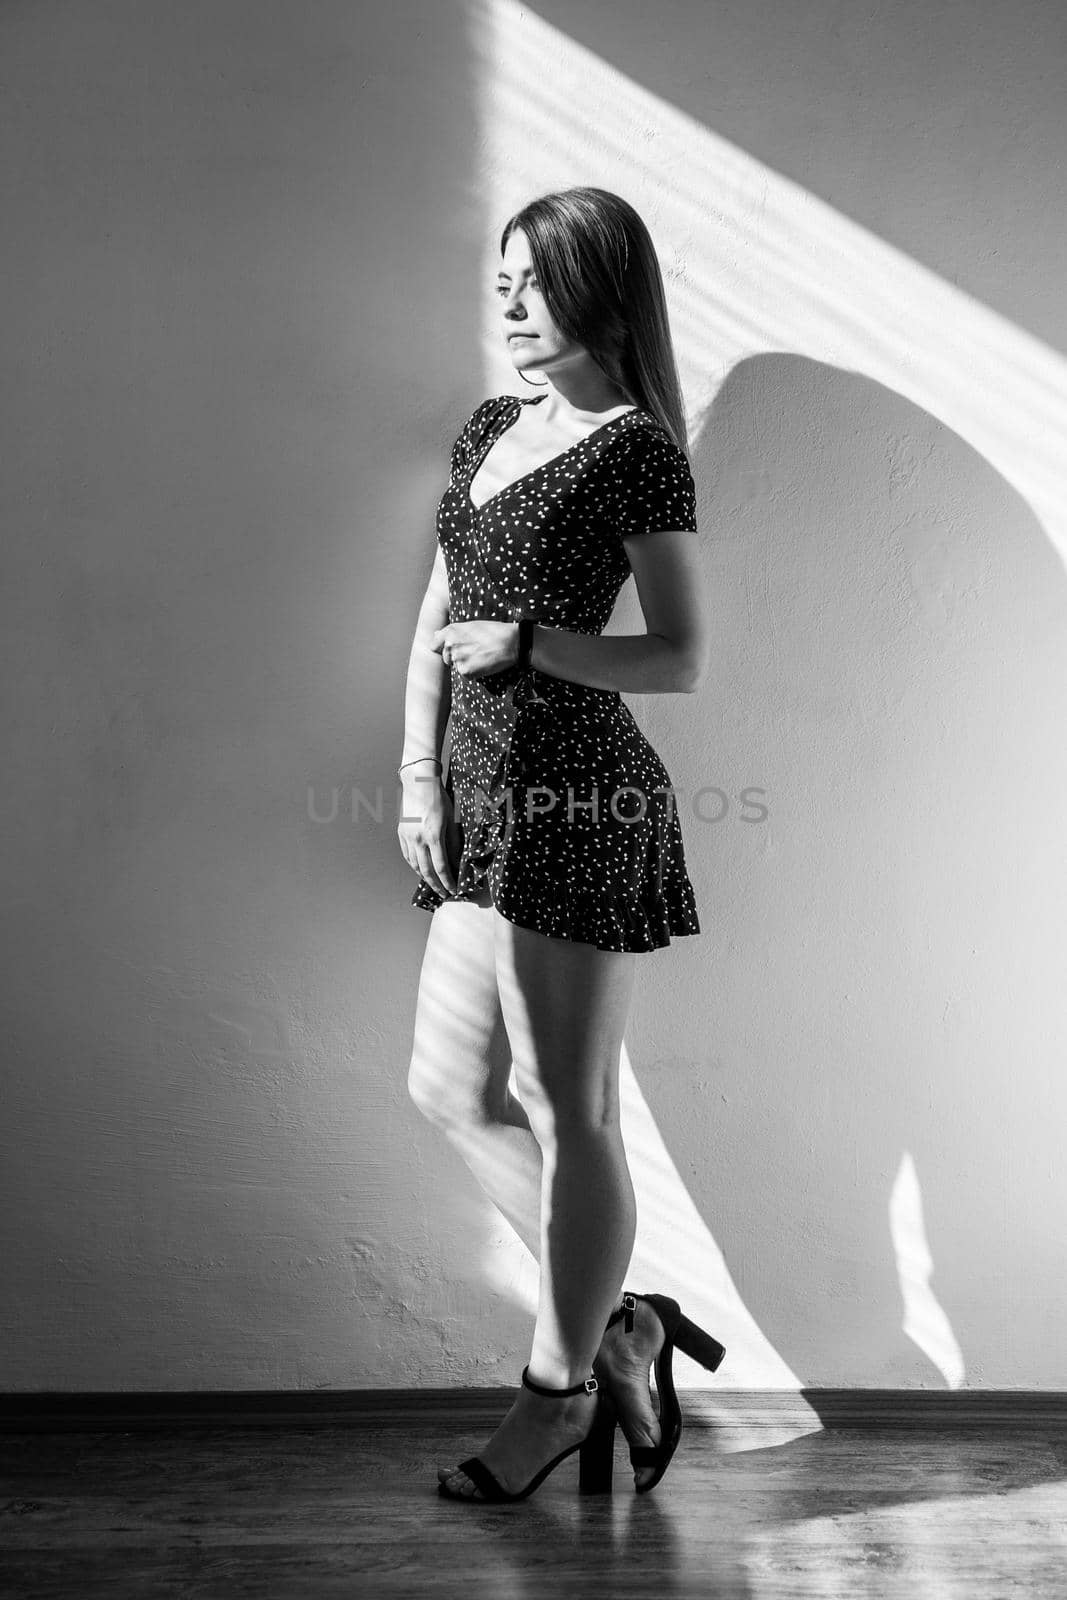 Attractive dark haired female standing looking away with romantic expression, wearing dress and sandals. Black and white photography, indoor studio shot illuminated by sunlight from window.